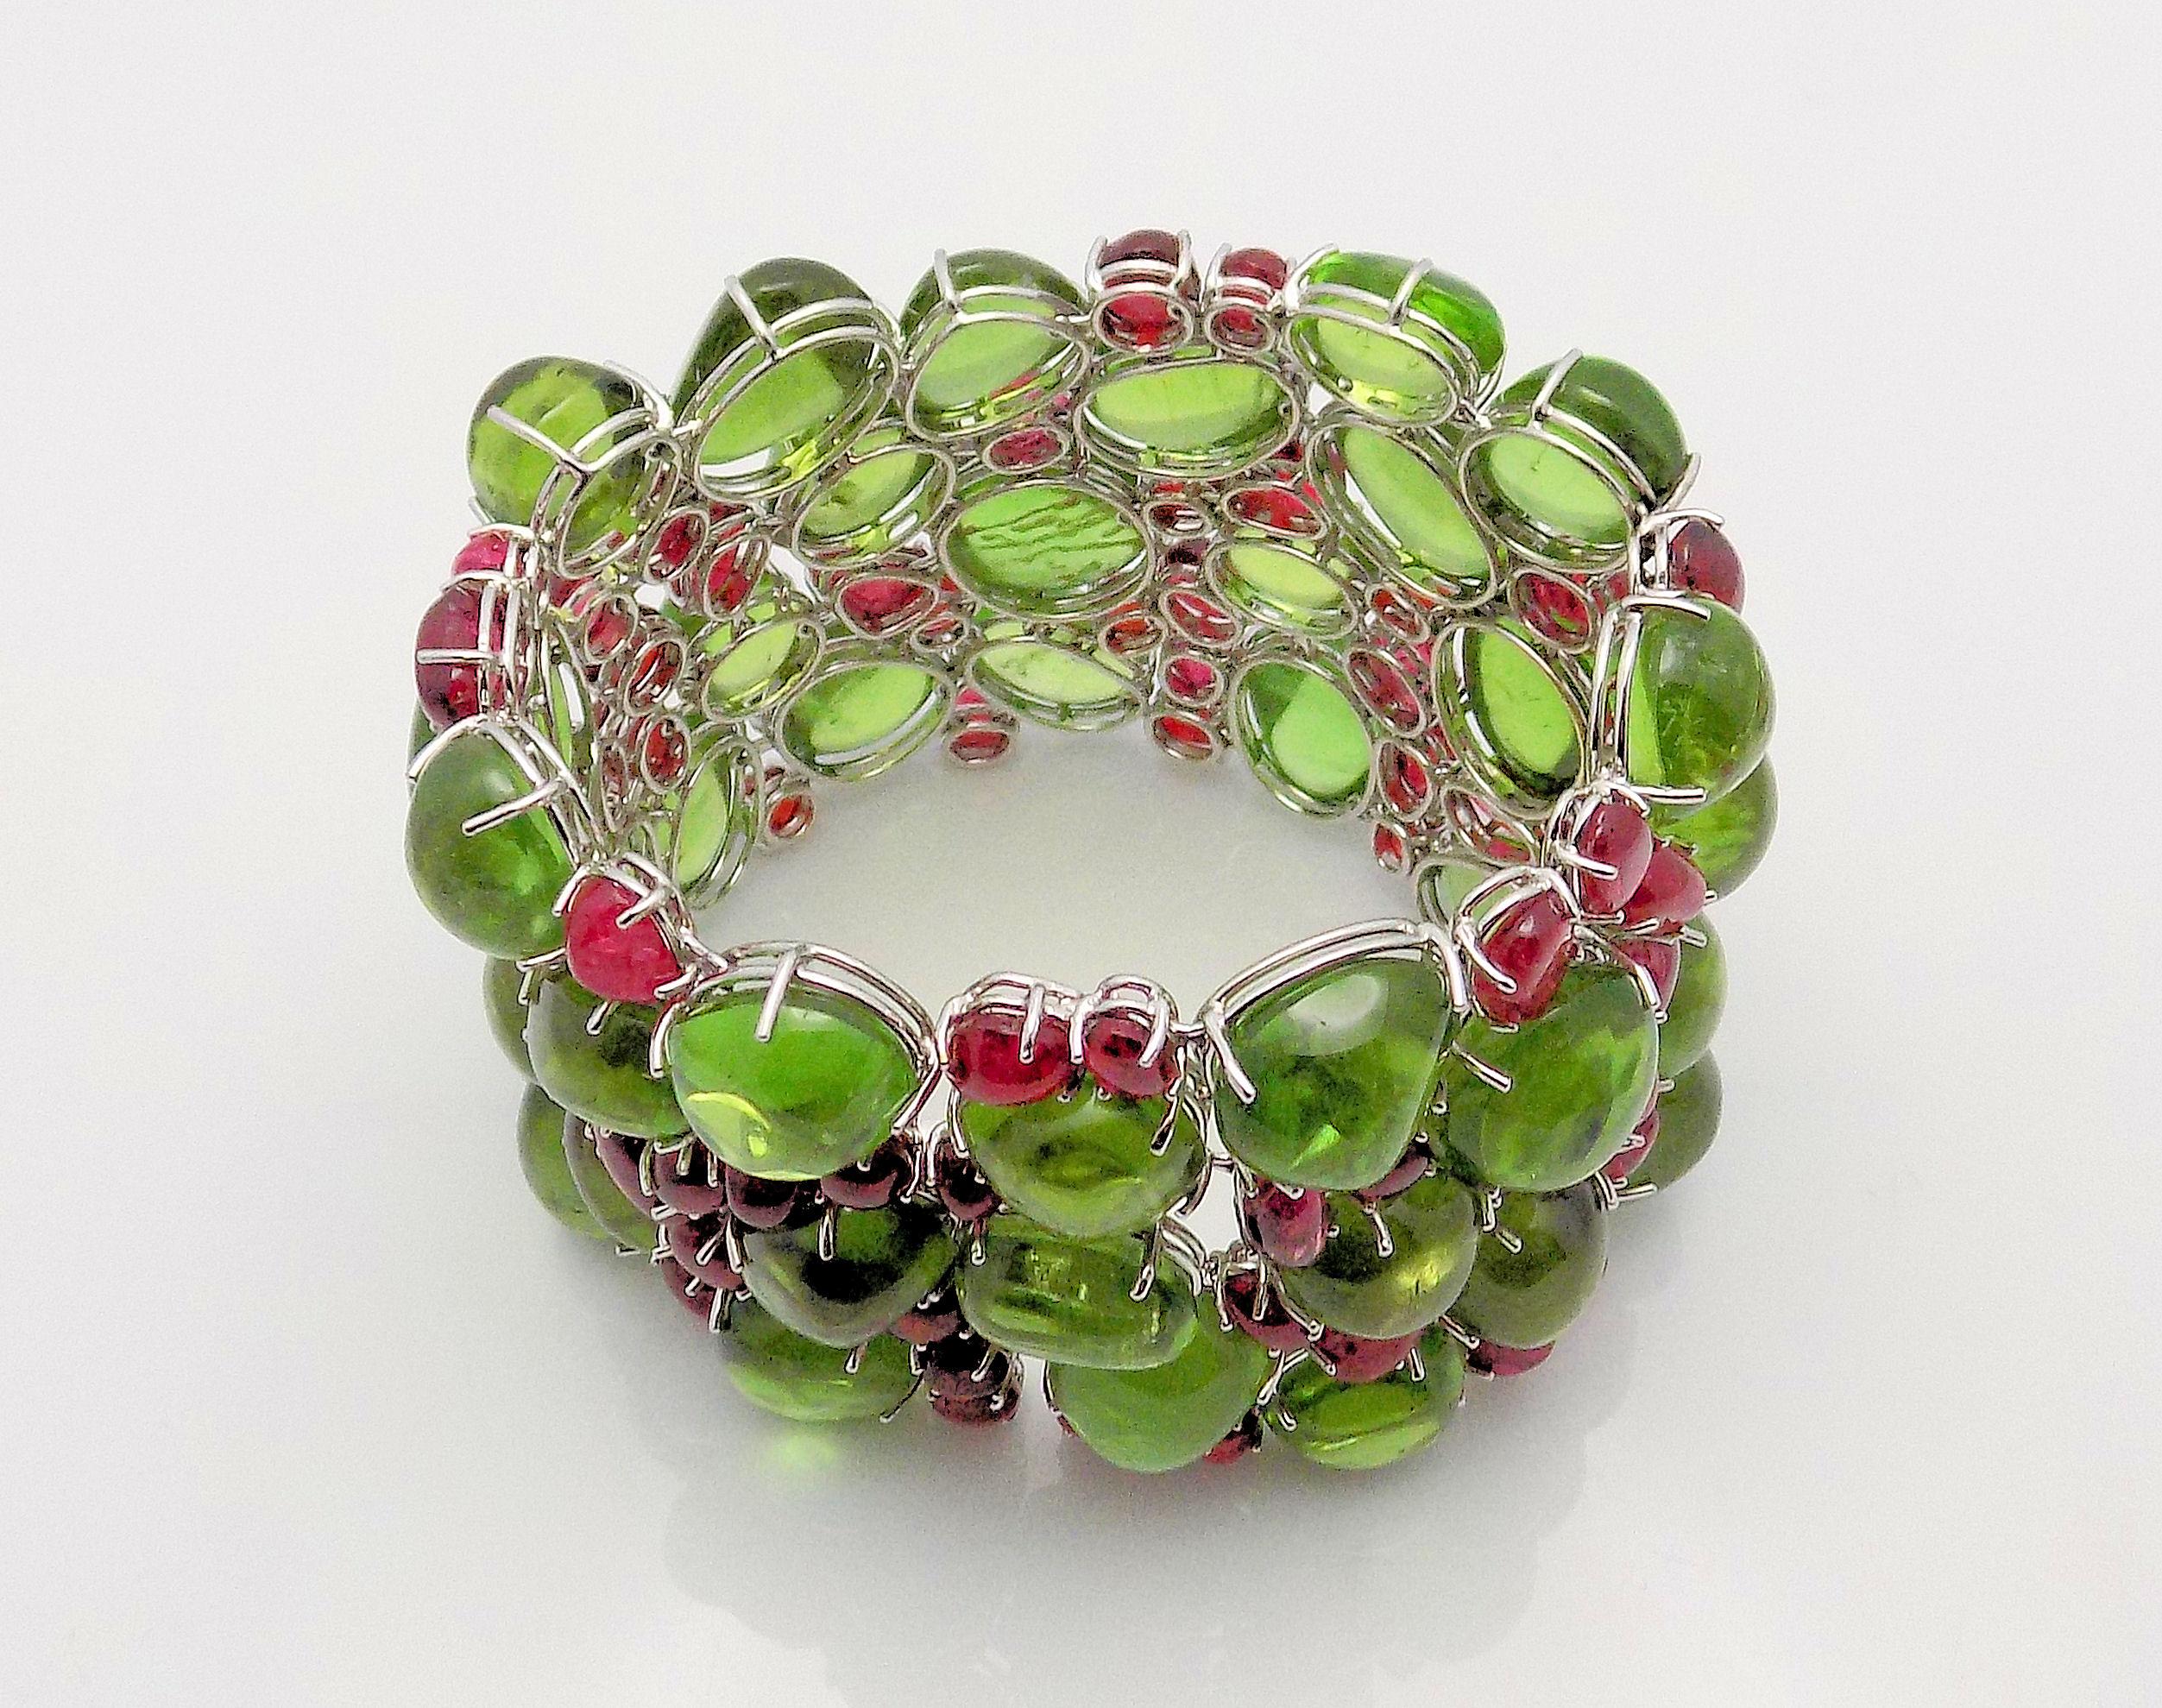 Gorgeous 18 Karat White Gold Handmade Bracelet Set with Cabochon Cut Peridots 585.62 Carat Total Weight and Cabochon Cut Red Spinels 92.97 Carat Total Weight; 7.75” Long 2.25” Wide; 143.1 DWT or 222.55 Grams.